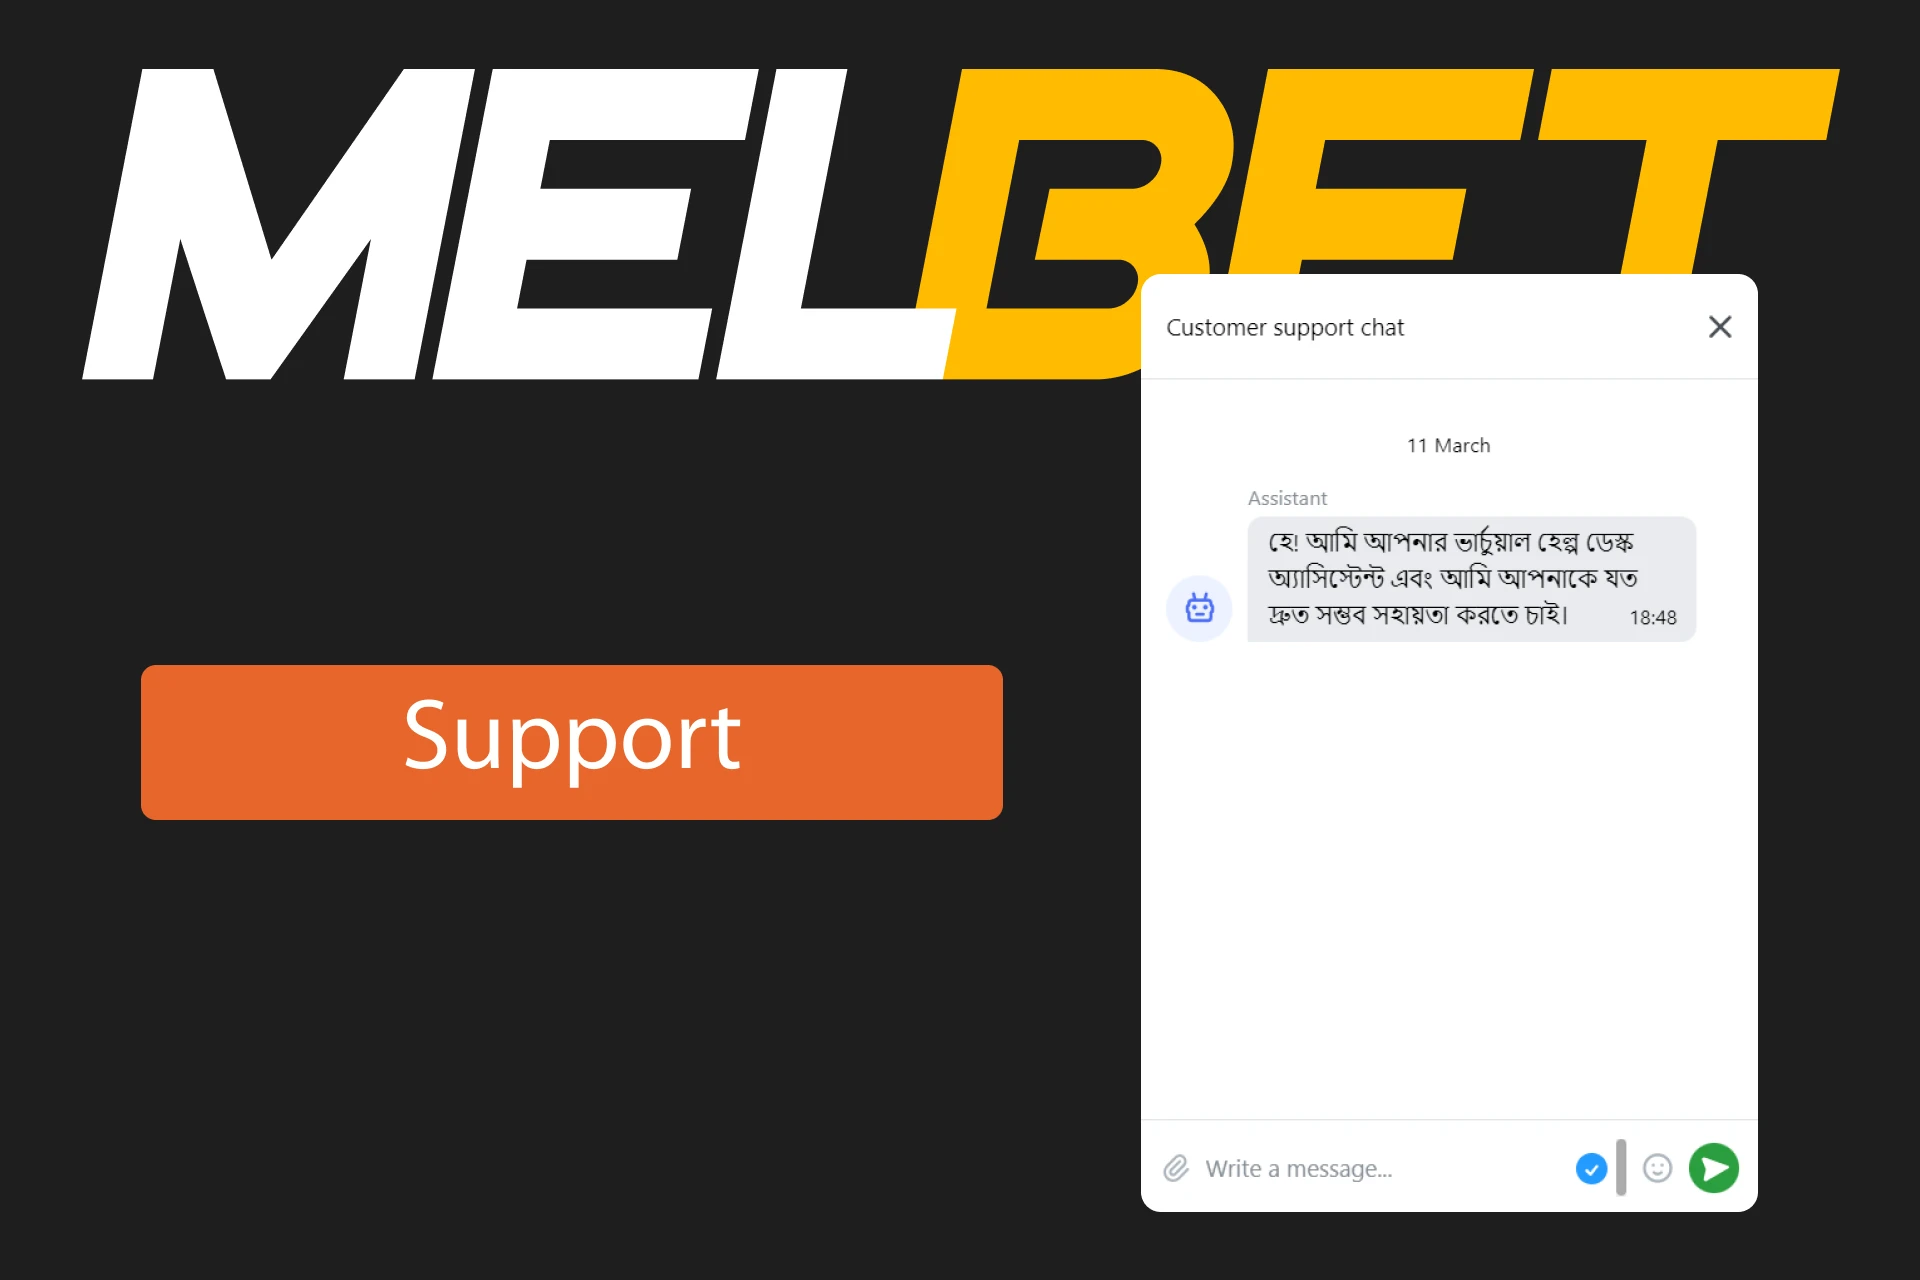 Contact 24/7 Melbet support if you have any questions or problems.